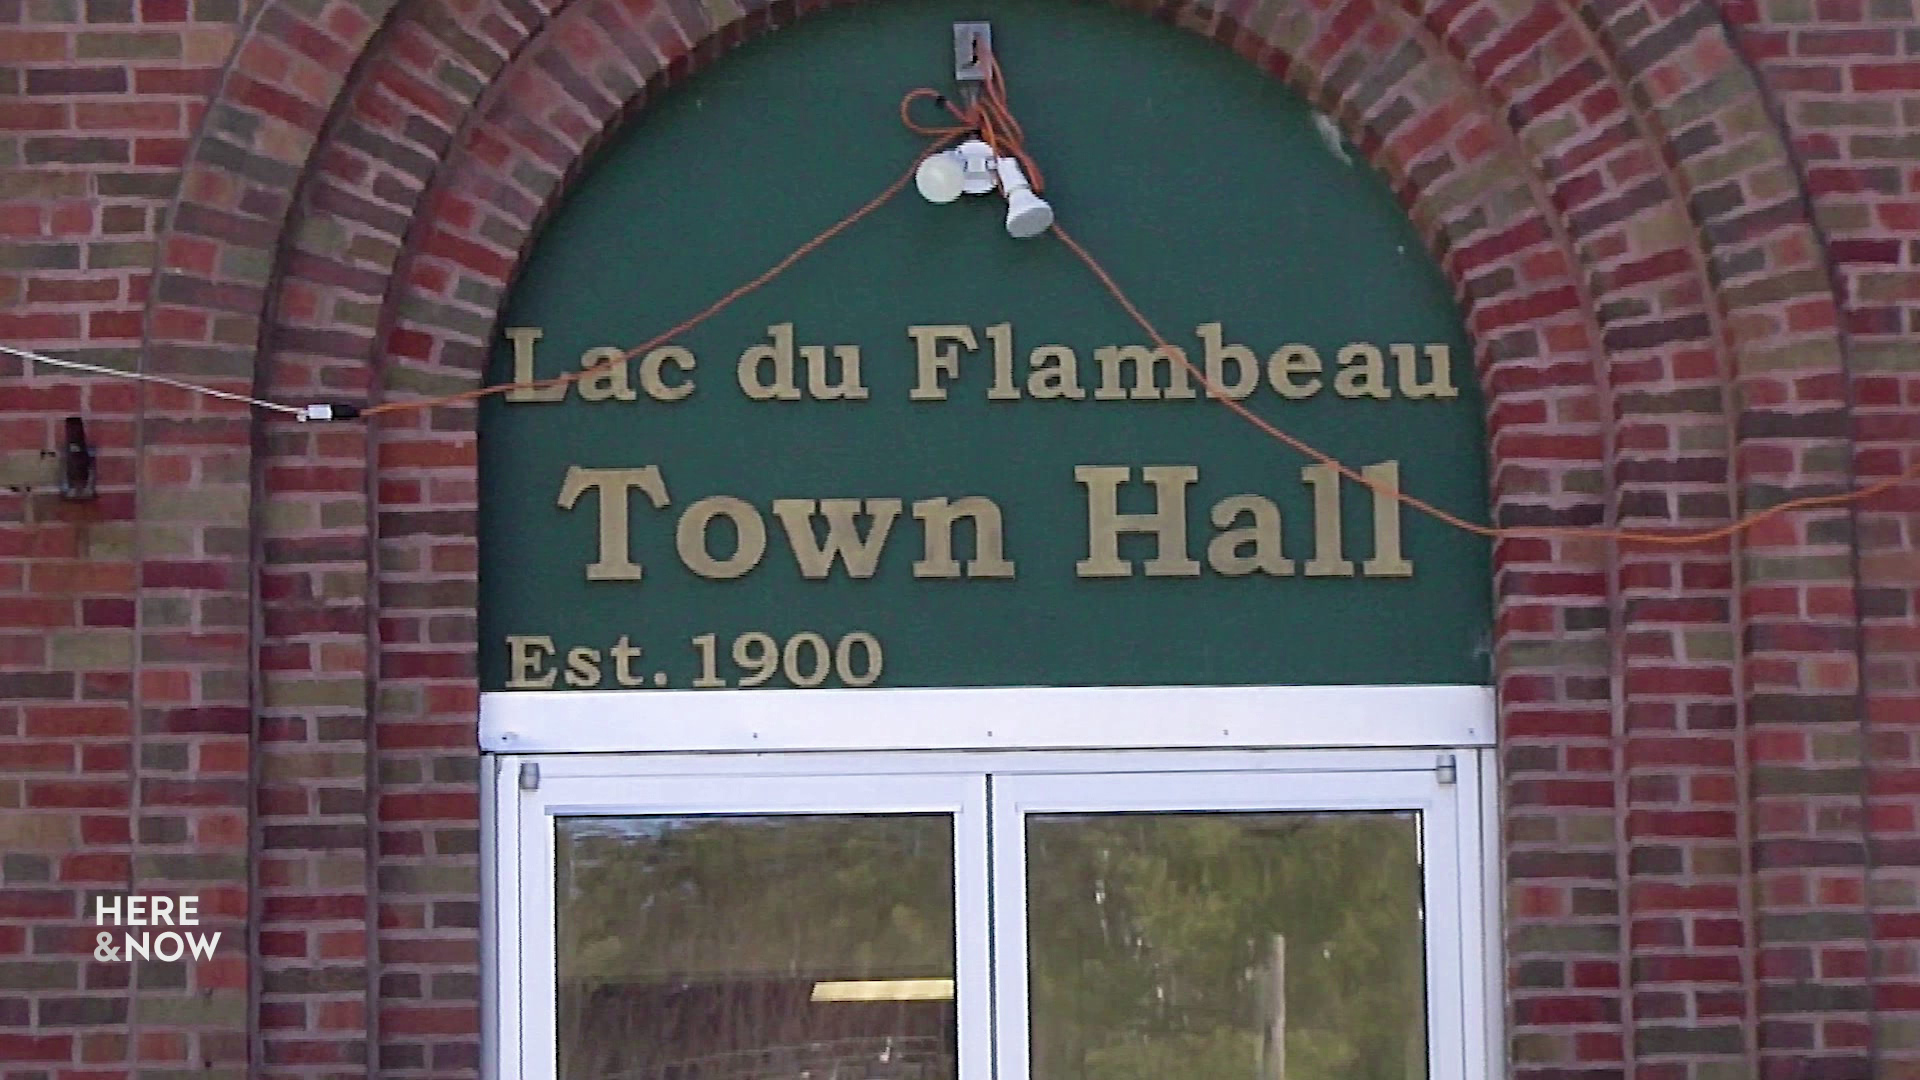 Signage reading "Lac du Flambeau Town Hall" is affixed above a door in a brick building.